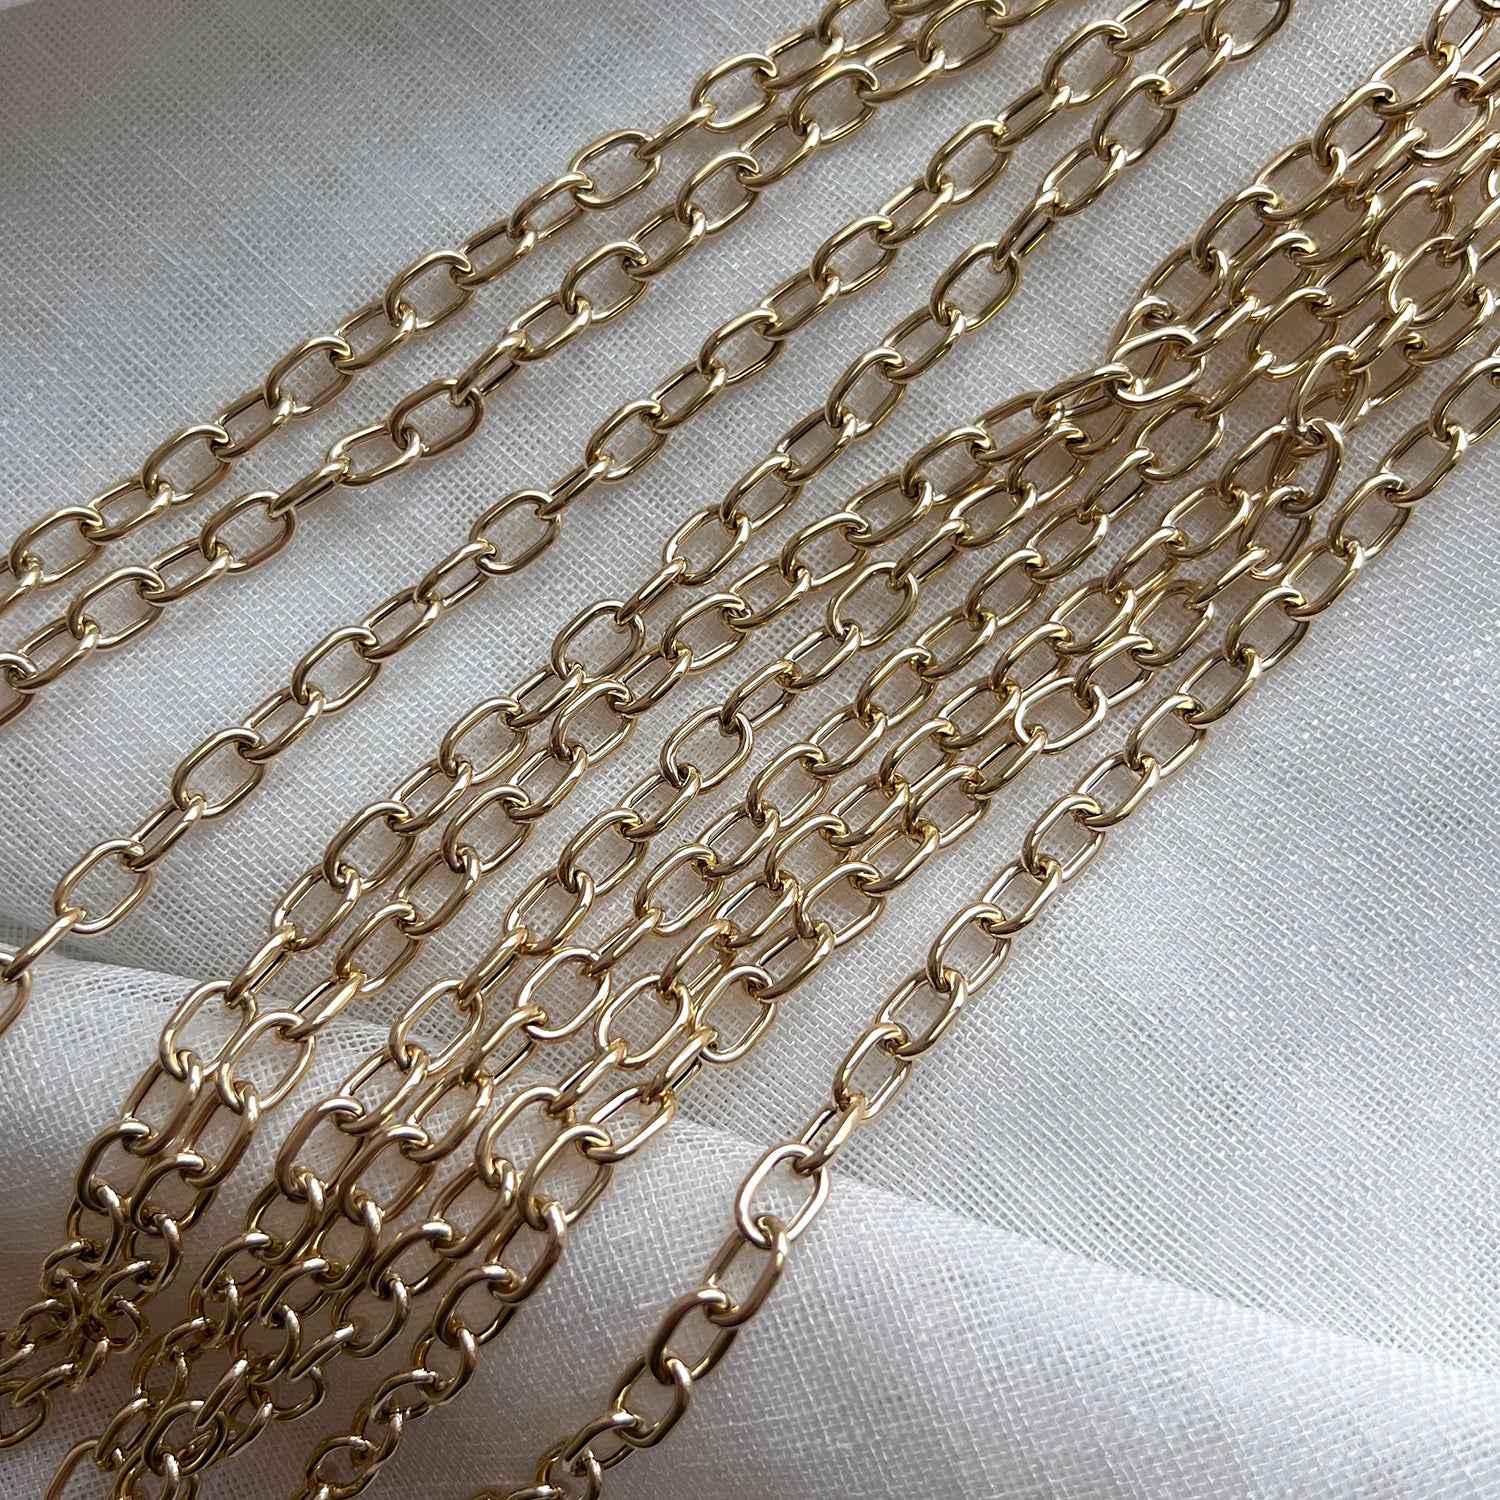 Box Chain Gold Plated Over 925 Sterling Silver 0.8 Mm Italy Chain Finished  Necklace Diamond Cut. Available in 16,18,20, 22 and 24 Inches - Etsy